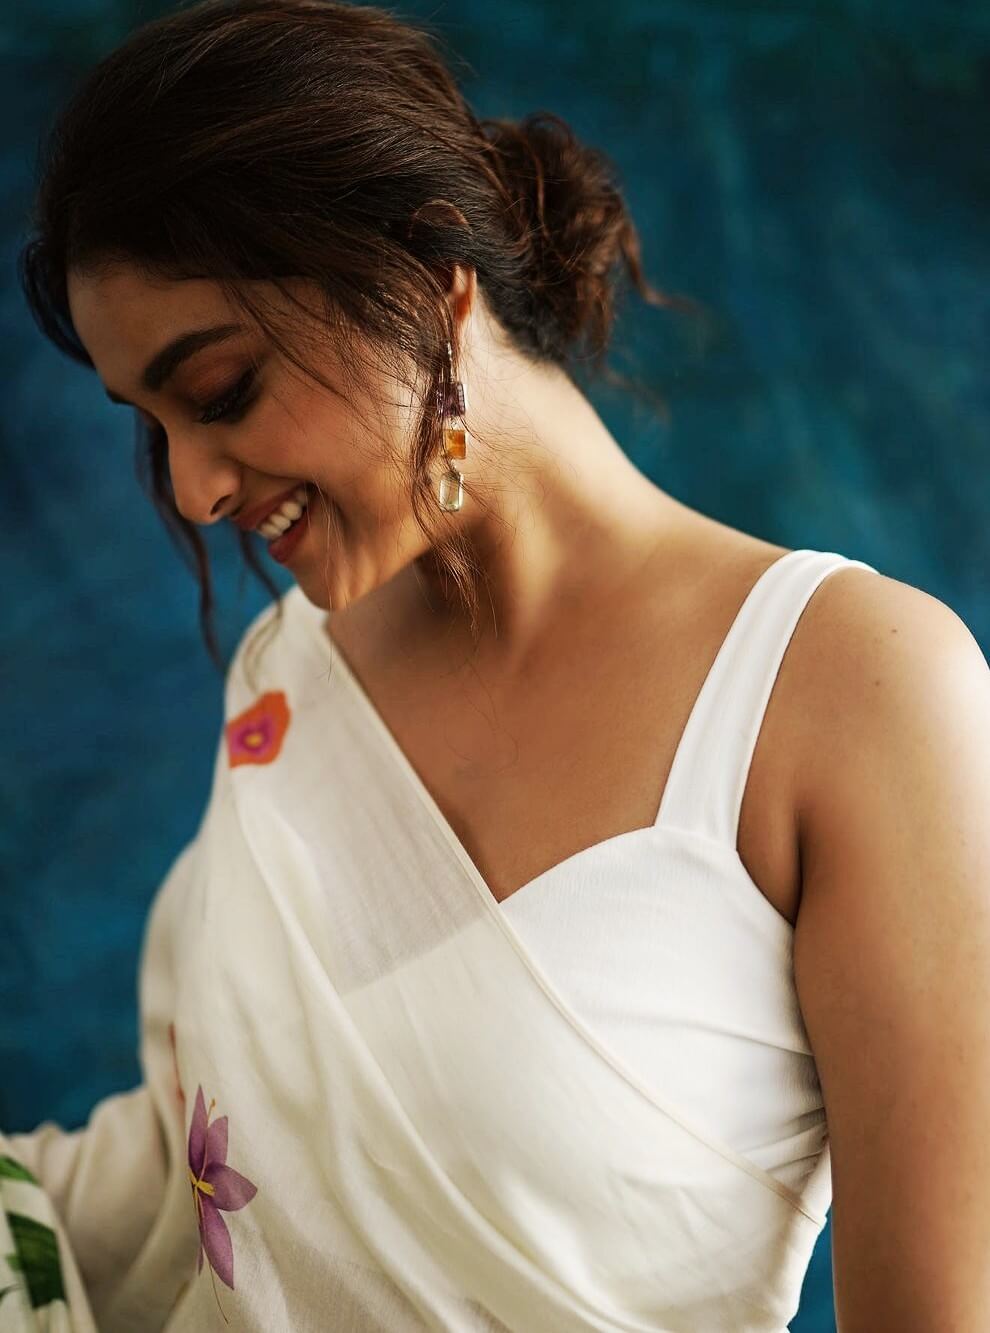 keerthy suresh sexy photo in sleeveless blouse
